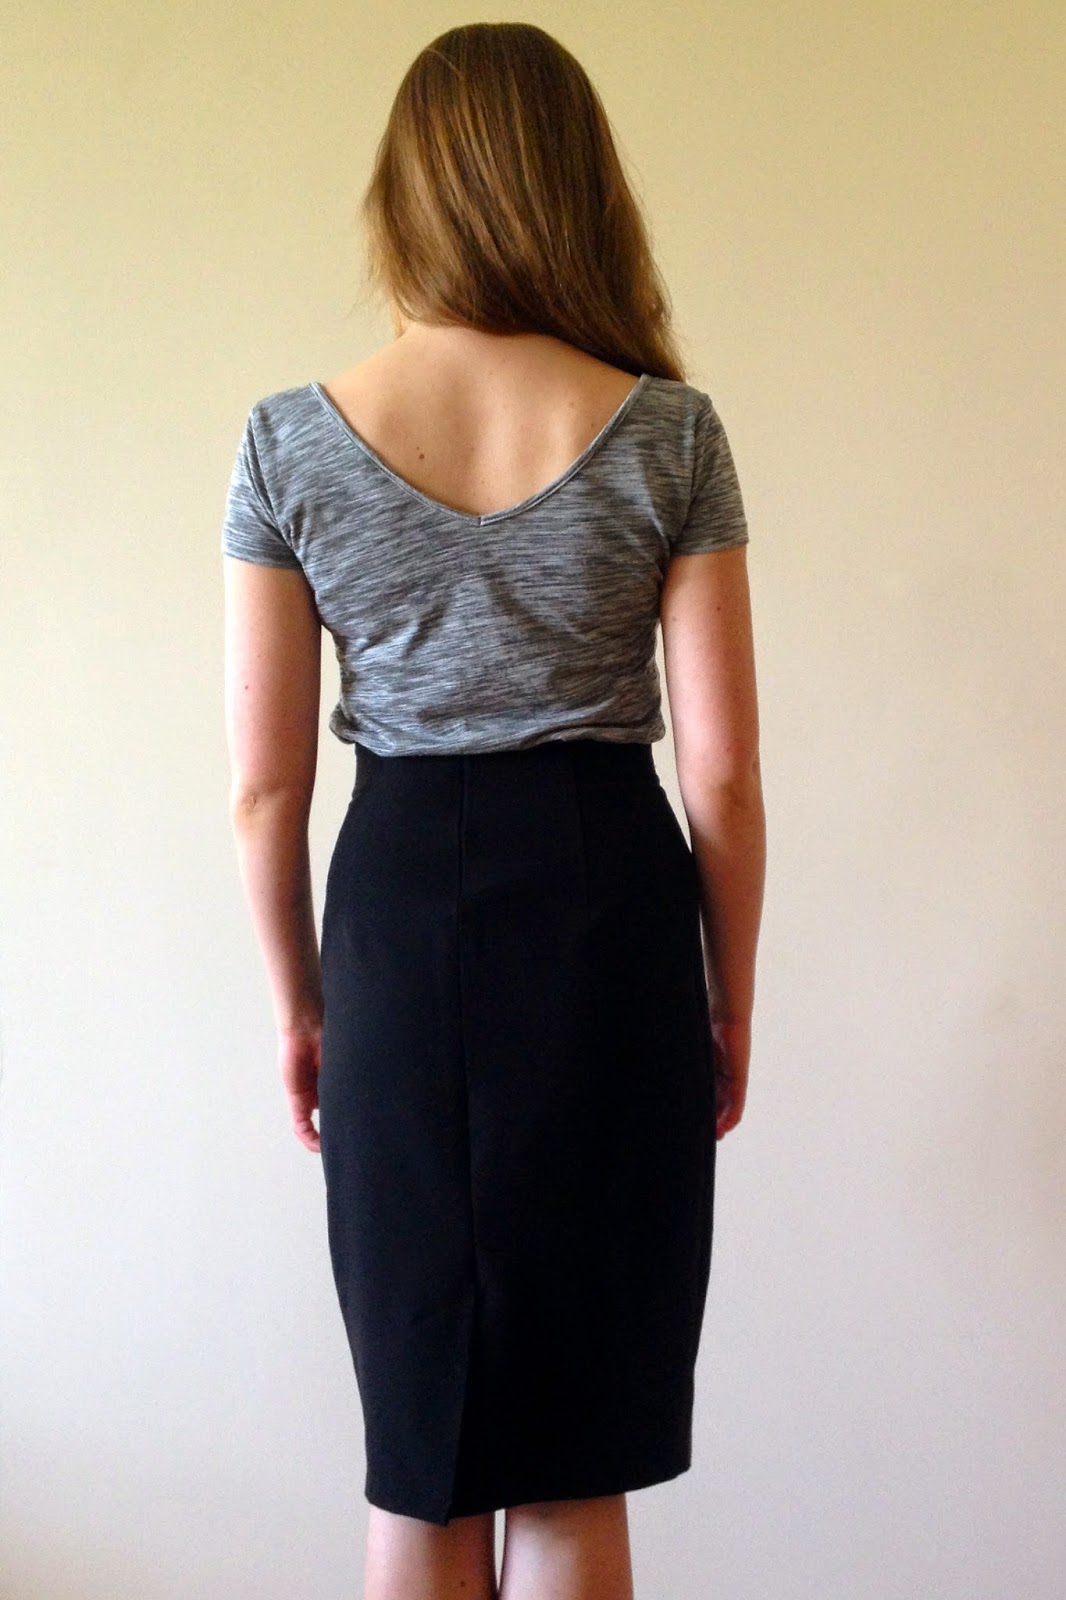 Diary of a Chain Stitcher : Two Ultimate Pencil Skirts